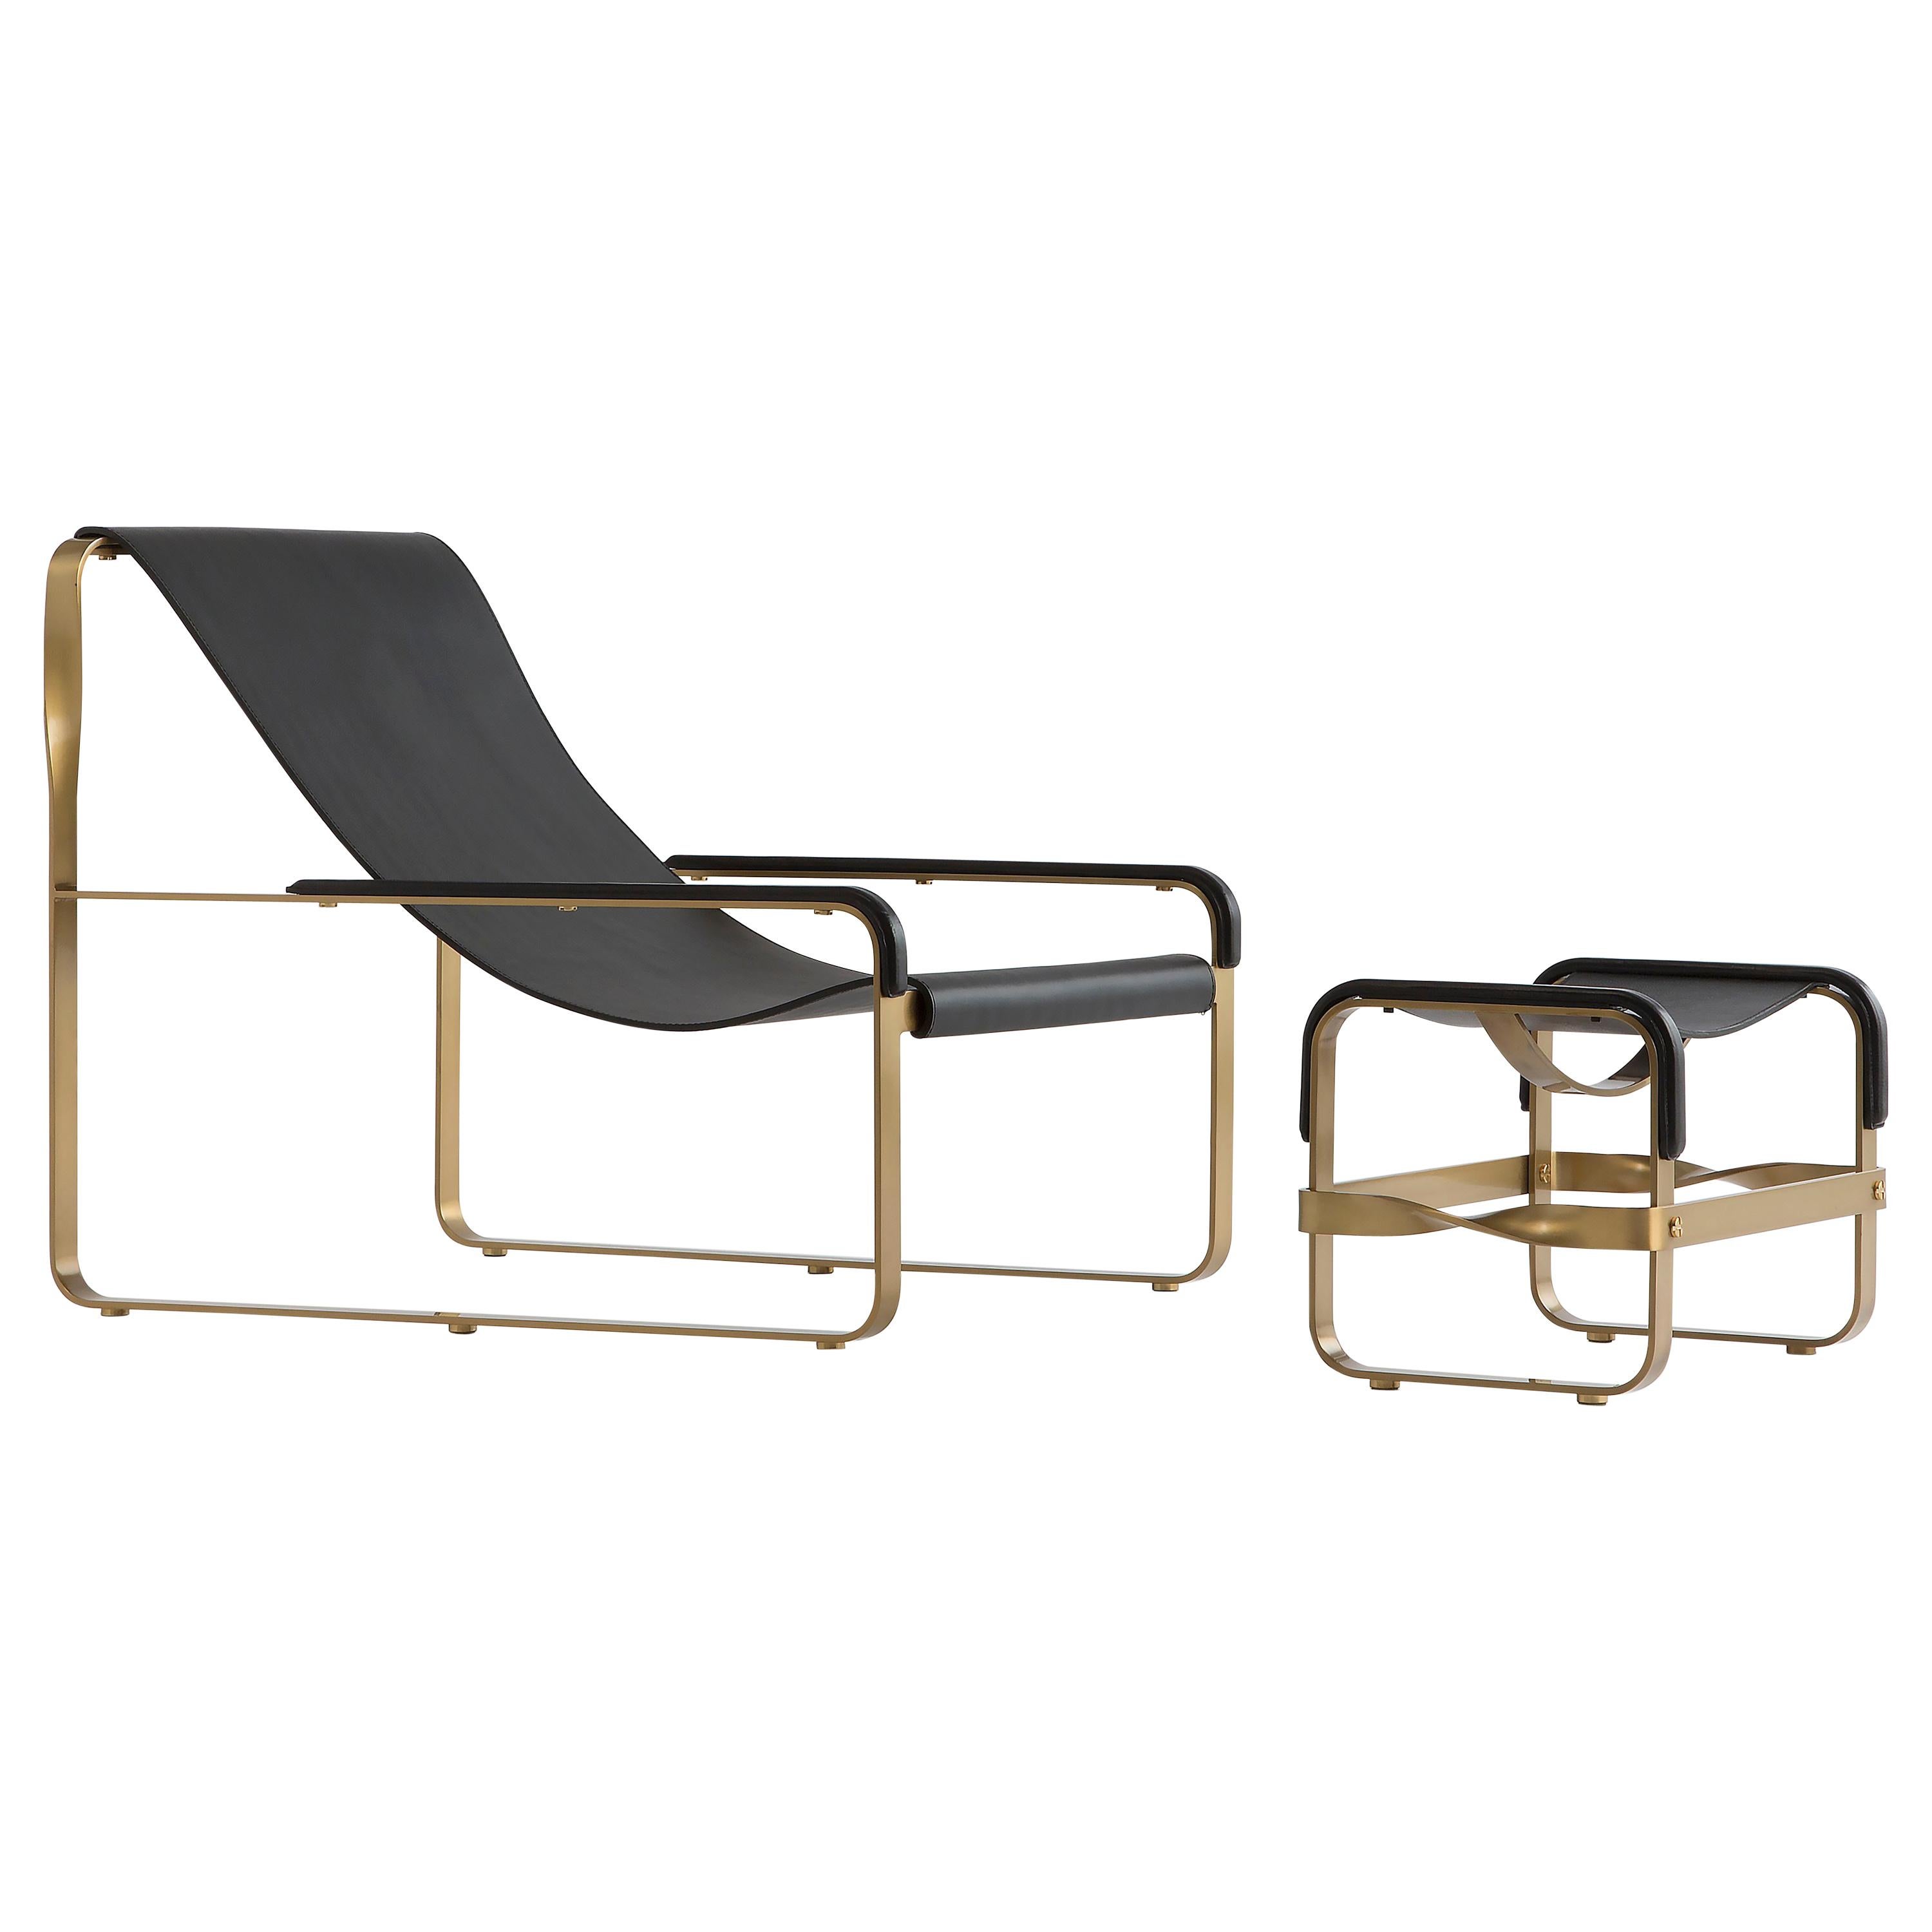 Polished Classic Contemporary Artisan Handmade Chaise Lounge Brass Metal & Black Leather For Sale